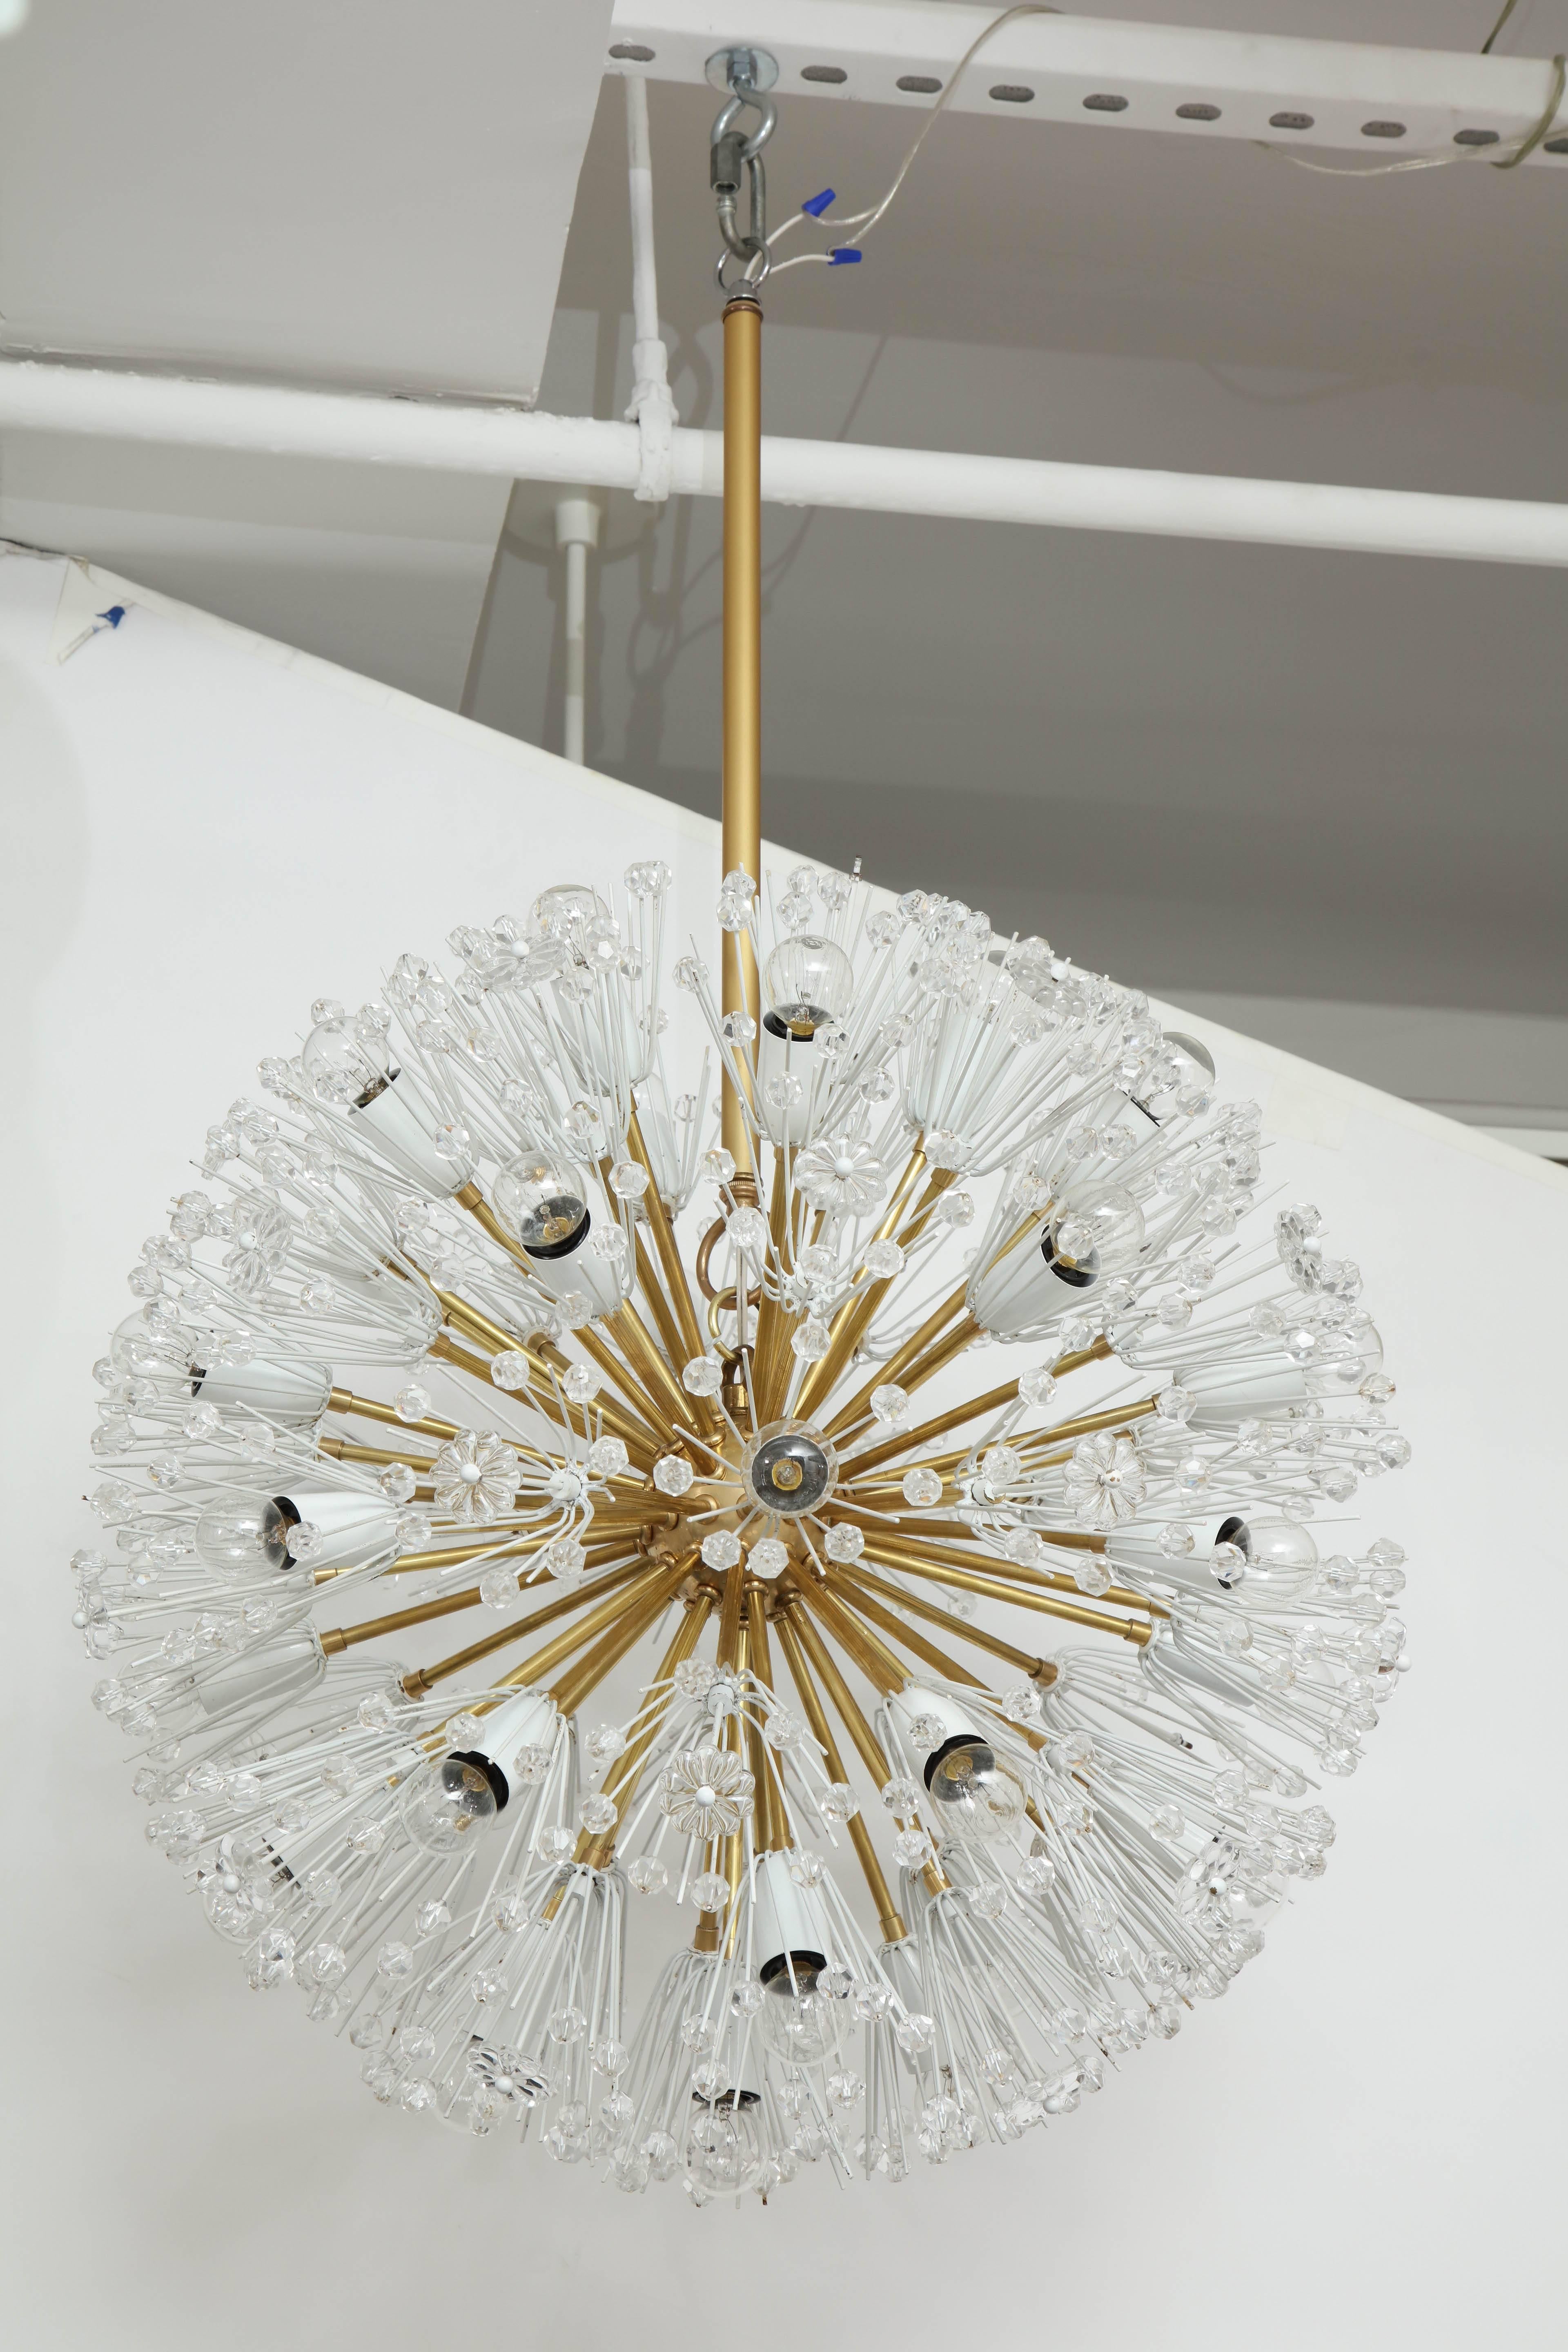 Giant 1950s Emil Stejnar snowball chandelier. 
There are thirty one lights which when illuminated make this chandelier with the copious amounts of Austrian crystal elements glisten into a statement piece.
The chandelier has been newly rewired for